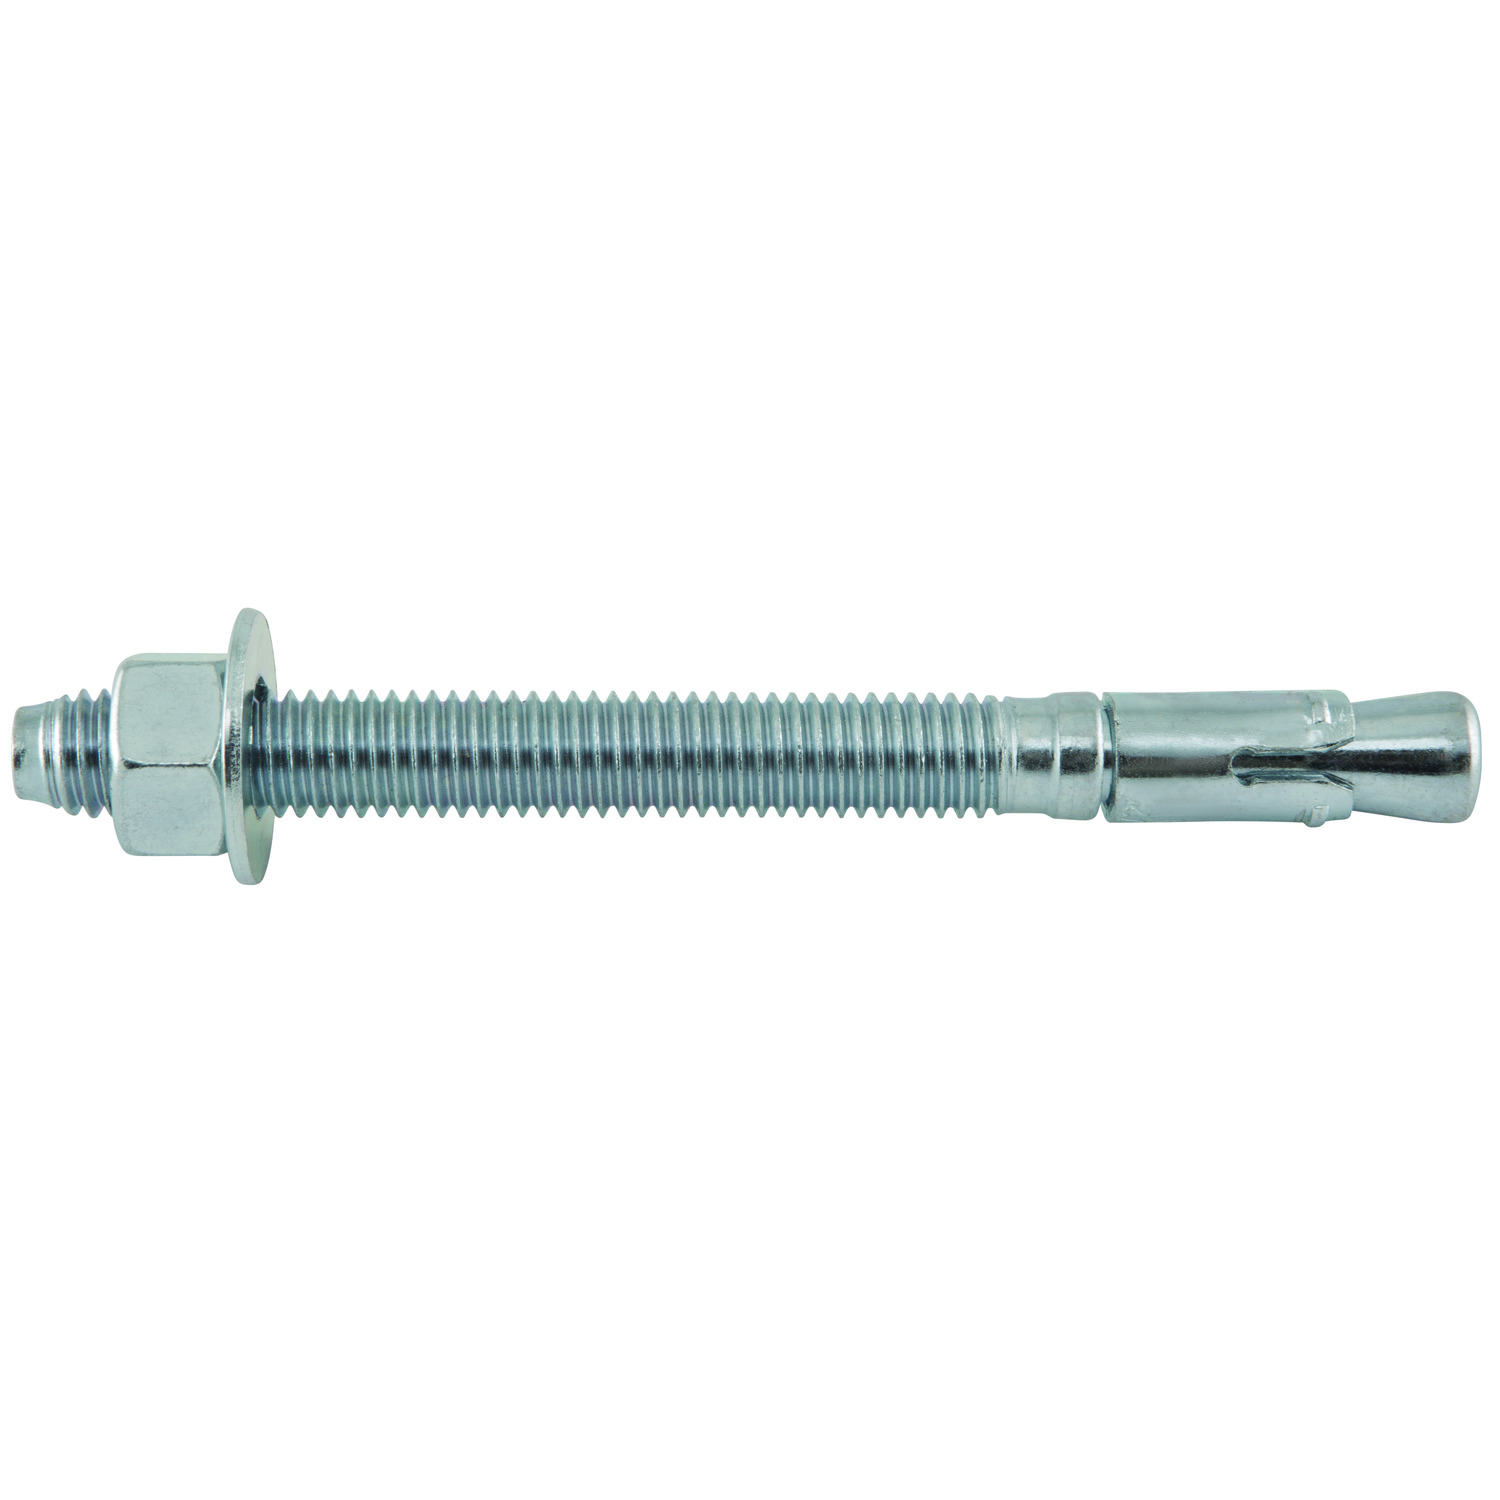 Powers 7413SD2-Power-Stud SD2 Wedge Expansion Anchor 3/8x3-Pkg of 150